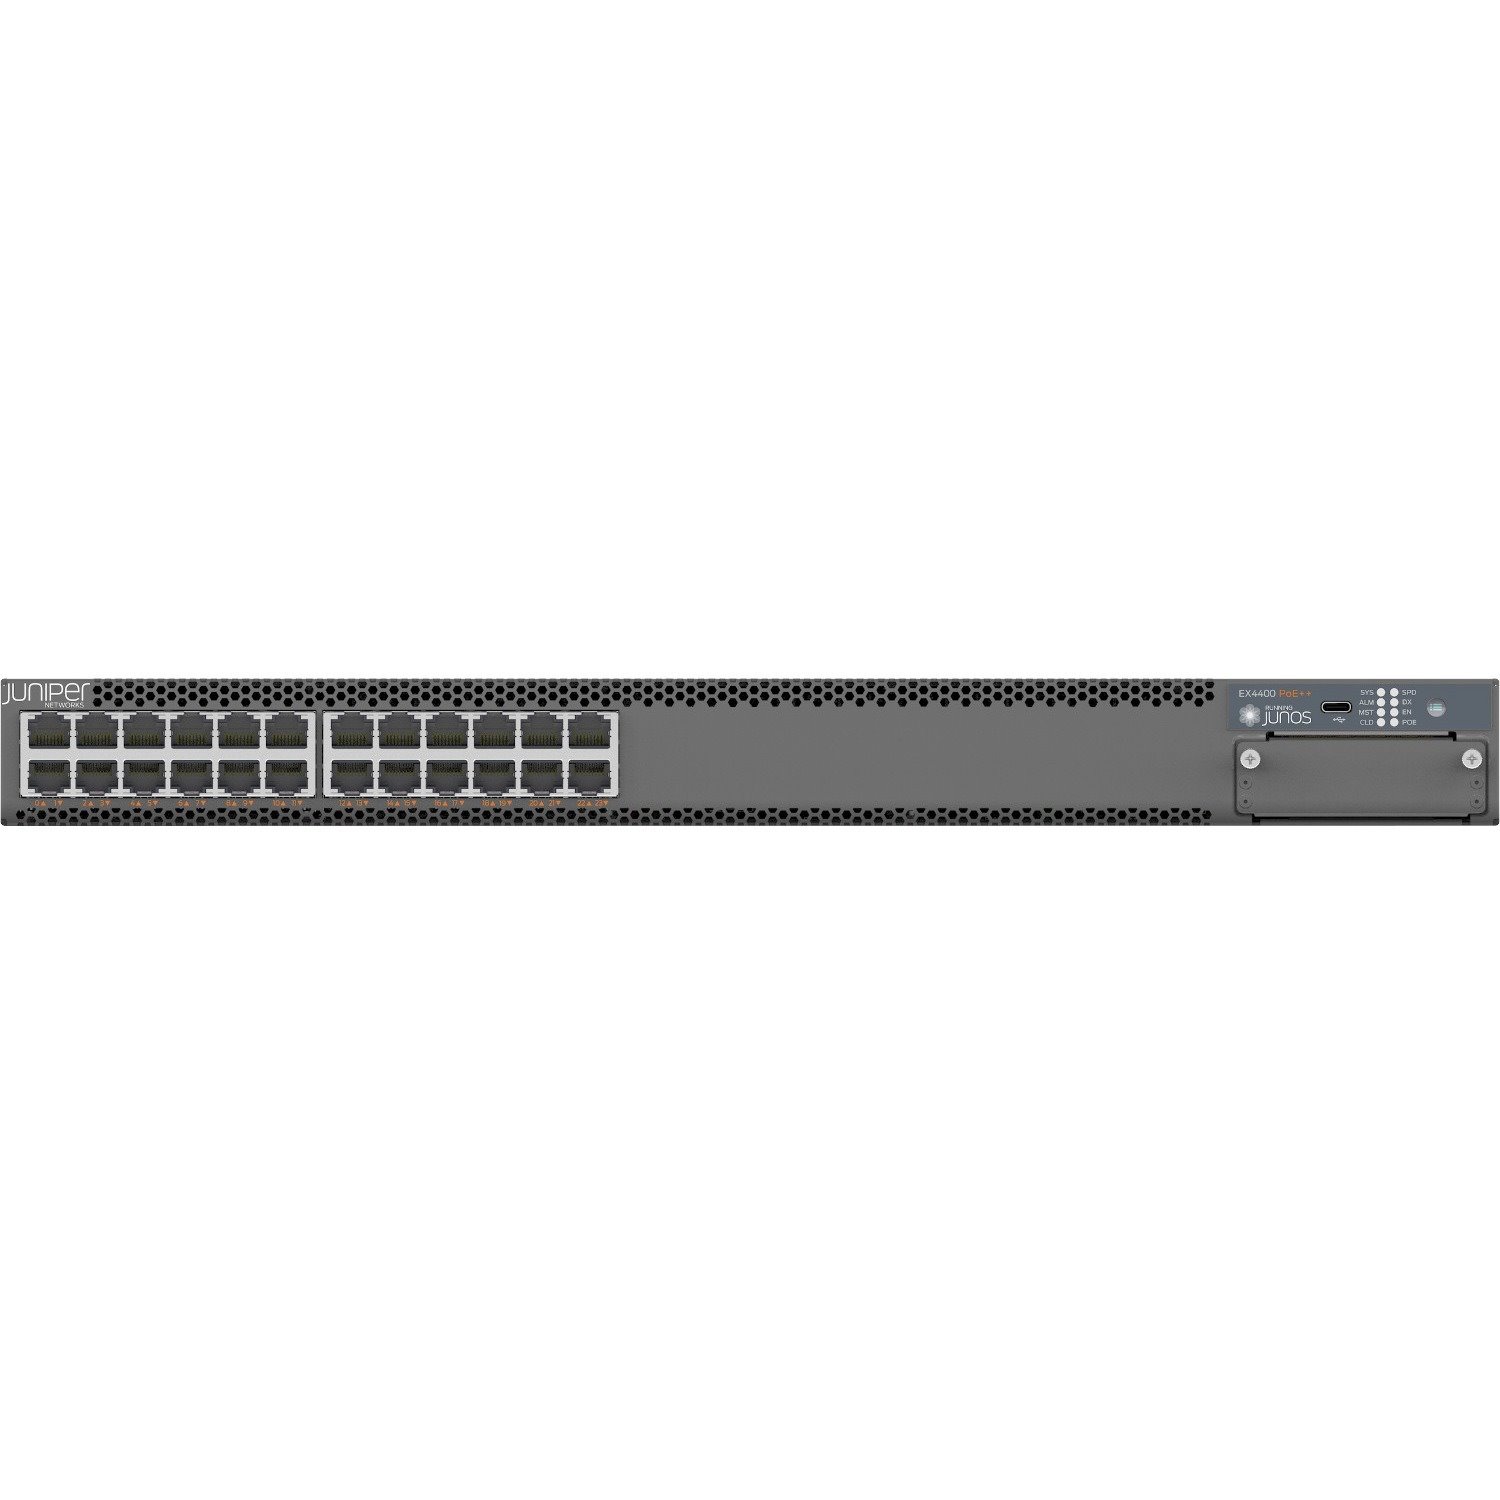 Juniper EX4400 EX4400-24P 24 Ports Manageable Ethernet Switch - Gigabit Ethernet, 25 Gigabit Ethernet, 100 Gigabit Ethernet - 10/100/1000Base-T, 25GBase-X, 100GBase-X